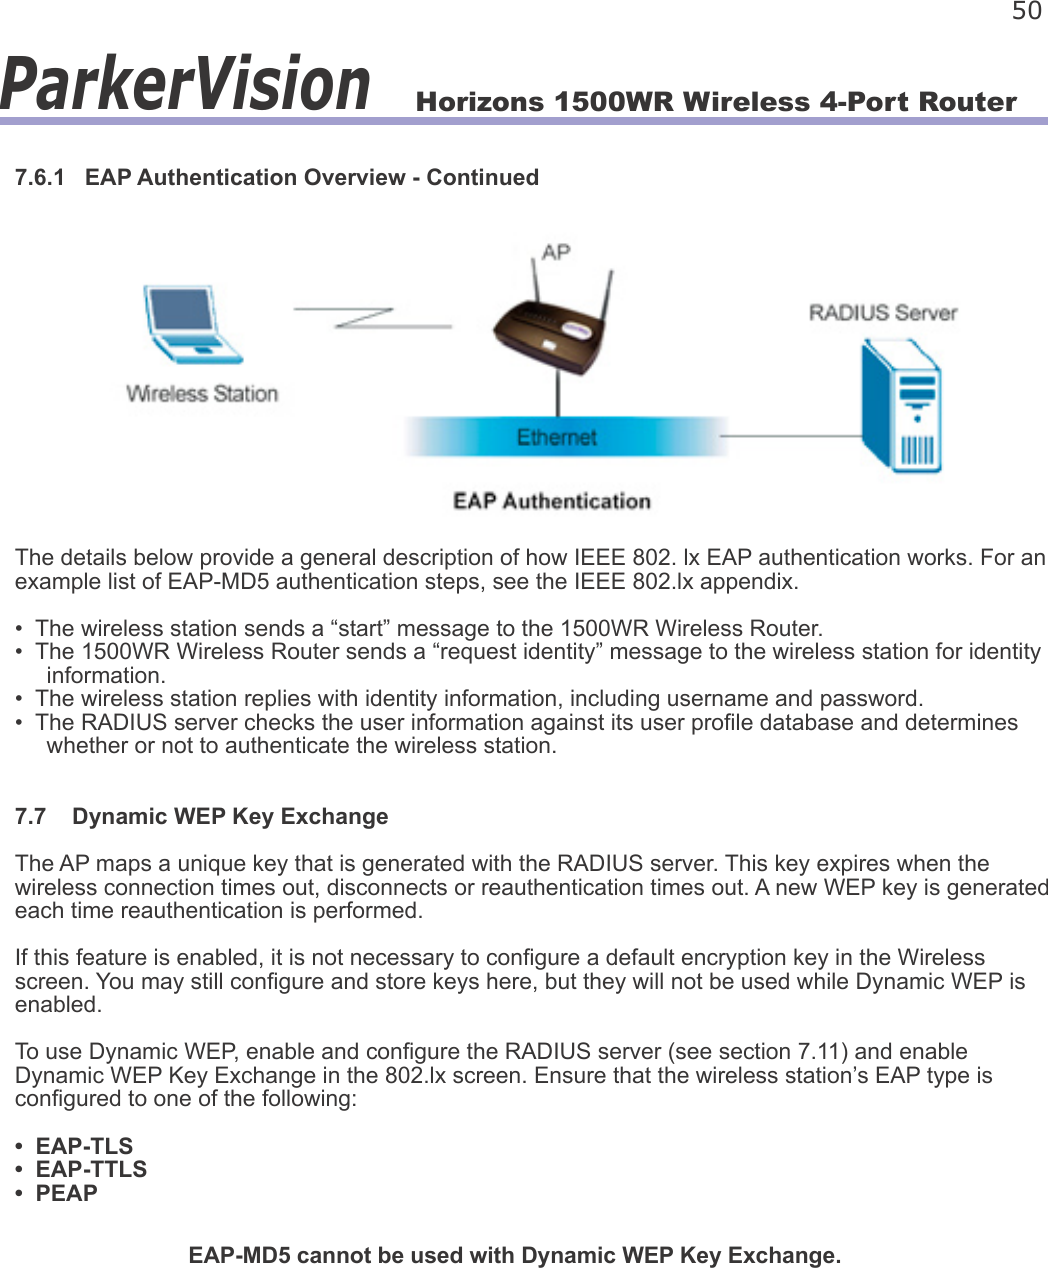 Horizons 1500WR Wireless 4-Port Router 50ParkerVision7.6.1   EAP Authentication Overview - ContinuedThe details below provide a general description of how IEEE 802. lx EAP authentication works. For an example list of EAP-MD5 authentication steps, see the IEEE 802.lx appendix.•  The wireless station sends a “start” message to the 1500WR Wireless Router.•  The 1500WR Wireless Router sends a “request identity” message to the wireless station for identity      information.•  The wireless station replies with identity information, including username and password.•  The RADIUS server checks the user information against its user prole database and determines     whether or not to authenticate the wireless station.7.7    Dynamic WEP Key ExchangeThe AP maps a unique key that is generated with the RADIUS server. This key expires when the wireless connection times out, disconnects or reauthentication times out. A new WEP key is generated each time reauthentication is performed.If this feature is enabled, it is not necessary to congure a default encryption key in the Wireless screen. You may still congure and store keys here, but they will not be used while Dynamic WEP is enabled.To use Dynamic WEP, enable and congure the RADIUS server (see section 7.11) and enable Dynamic WEP Key Exchange in the 802.lx screen. Ensure that the wireless station’s EAP type is congured to one of the following:•  EAP-TLS•  EAP-TTLS•  PEAPEAP-MD5 cannot be used with Dynamic WEP Key Exchange.